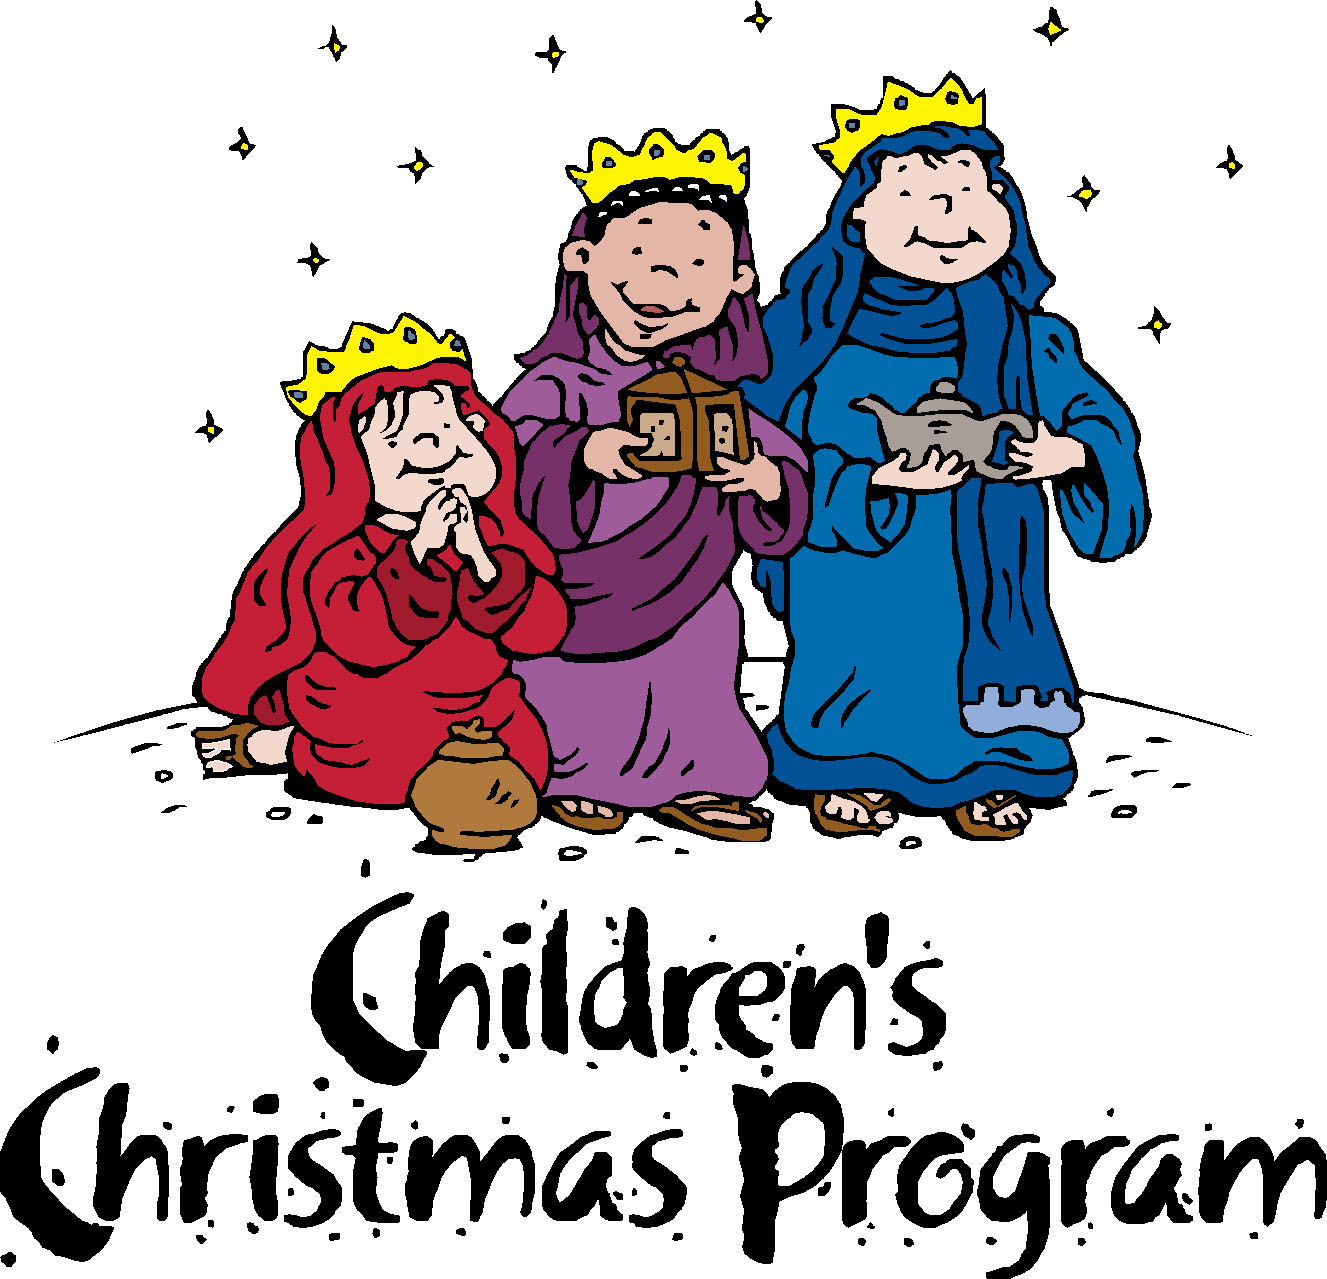 Free Christmas Program Cliparts, Download Free Clip Art, Free Clip.